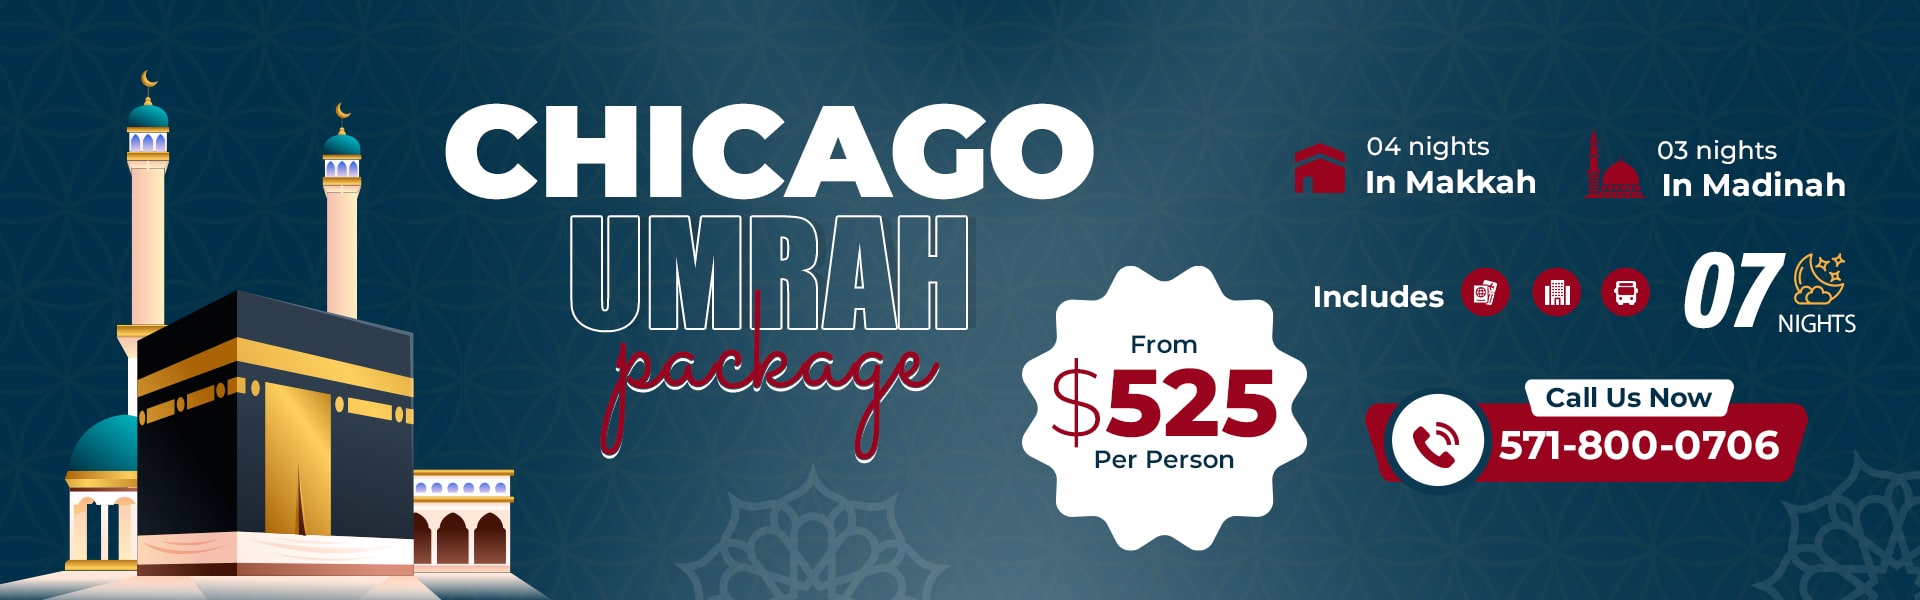 chicago umrah packages